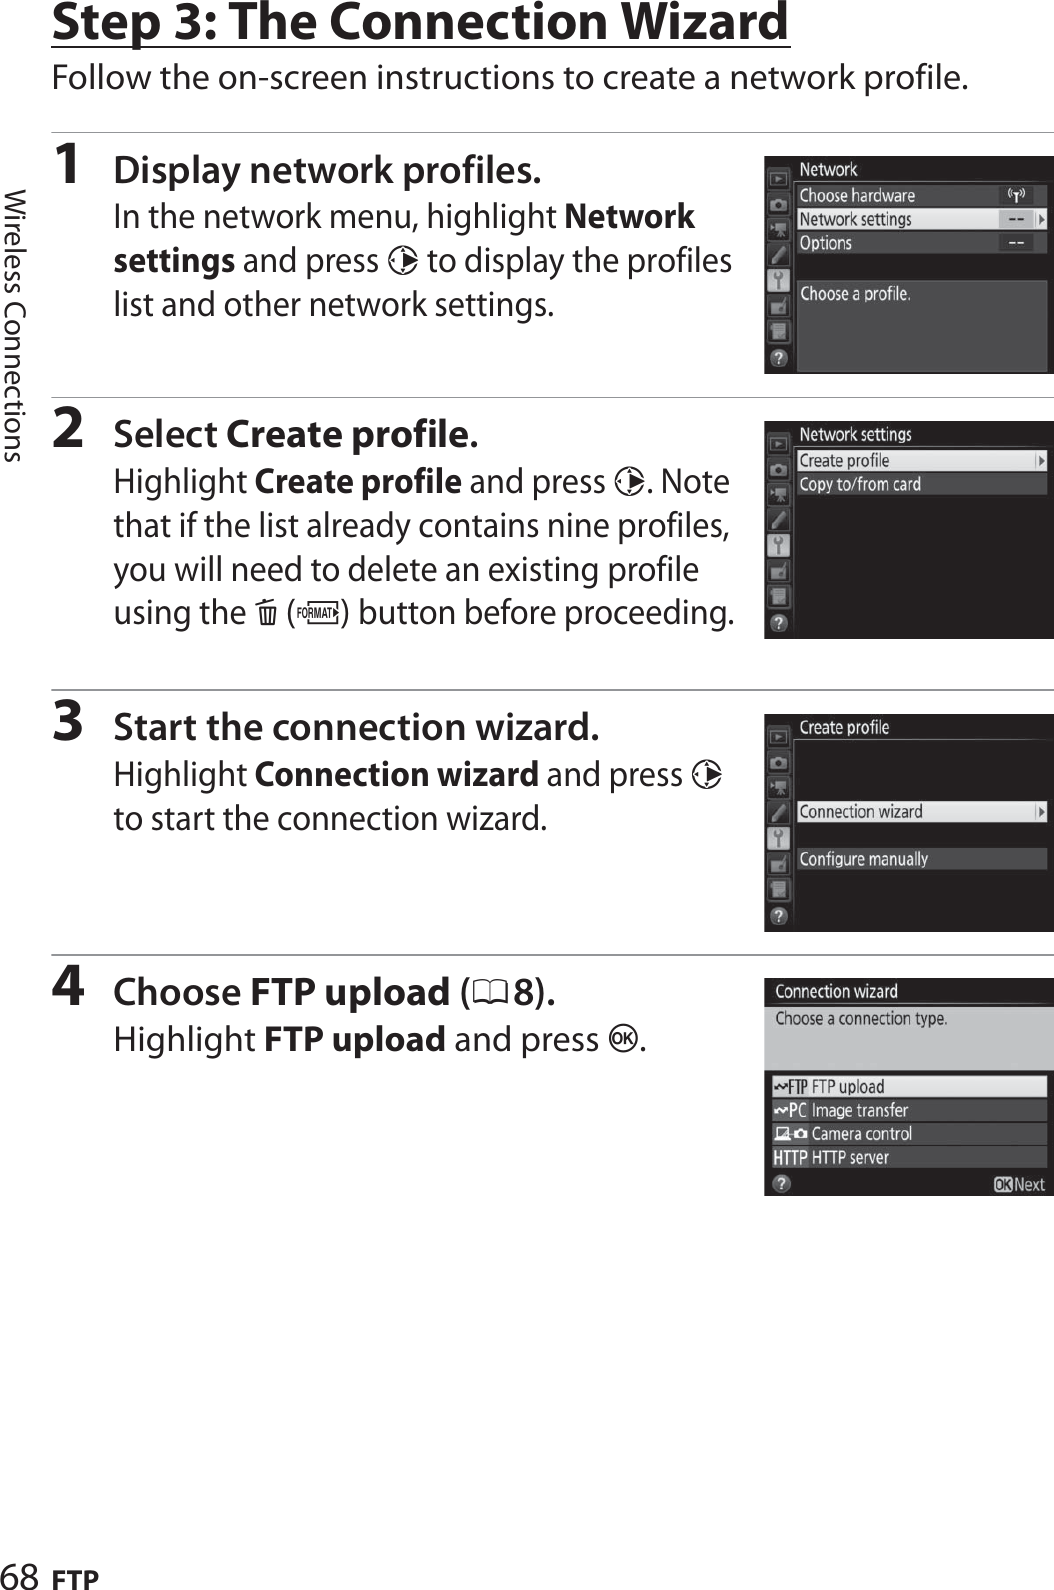 68 FTPWireless ConnectionsStep 3: The Connection WizardFollow the on-screen instructions to create a network profile.1Display network profiles.In the network menu, highlight Network settings and press 2 to display the profiles list and other network settings.2Select Create profile.Highlight Create profile and press 2. Note that if the list already contains nine profiles, you will need to delete an existing profile using the O(Q) button before proceeding.3Start the connection wizard.Highlight Connection wizard and press 2 to start the connection wizard.4Choose FTP upload (08).Highlight FTP upload and press J.